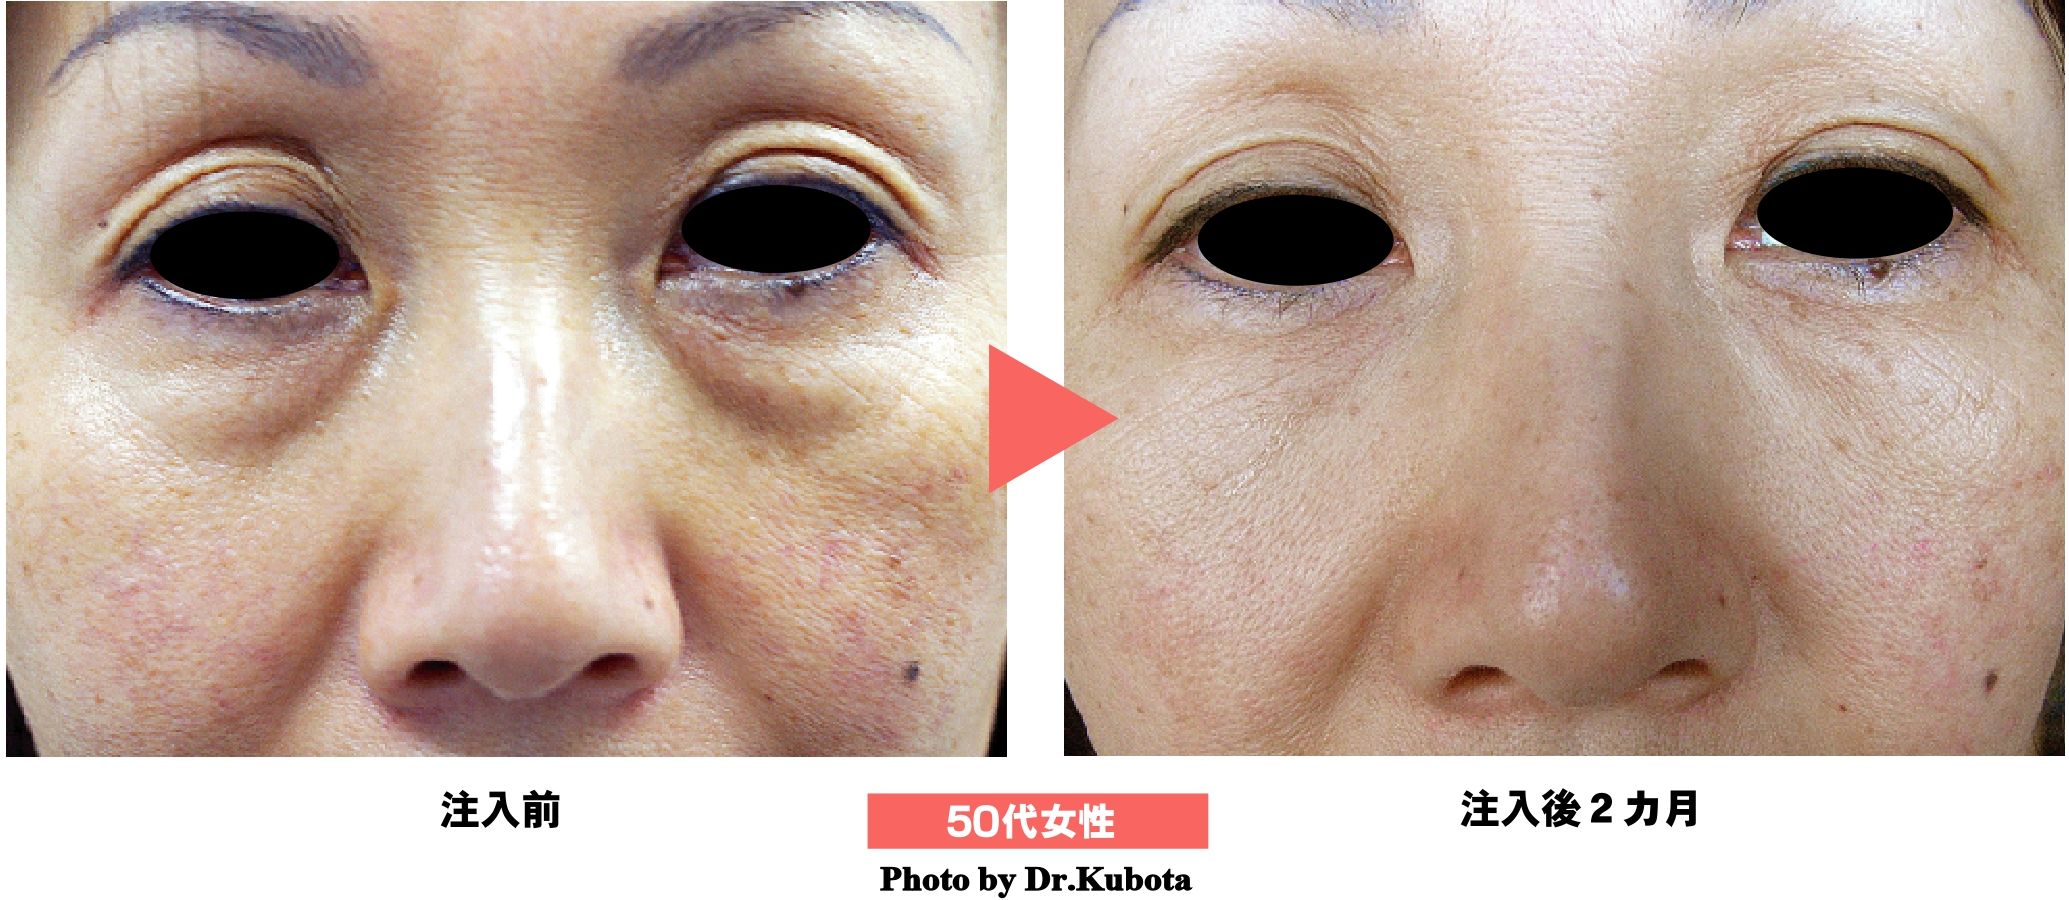 Prp Skin Treatment Before And After - your magazine lite